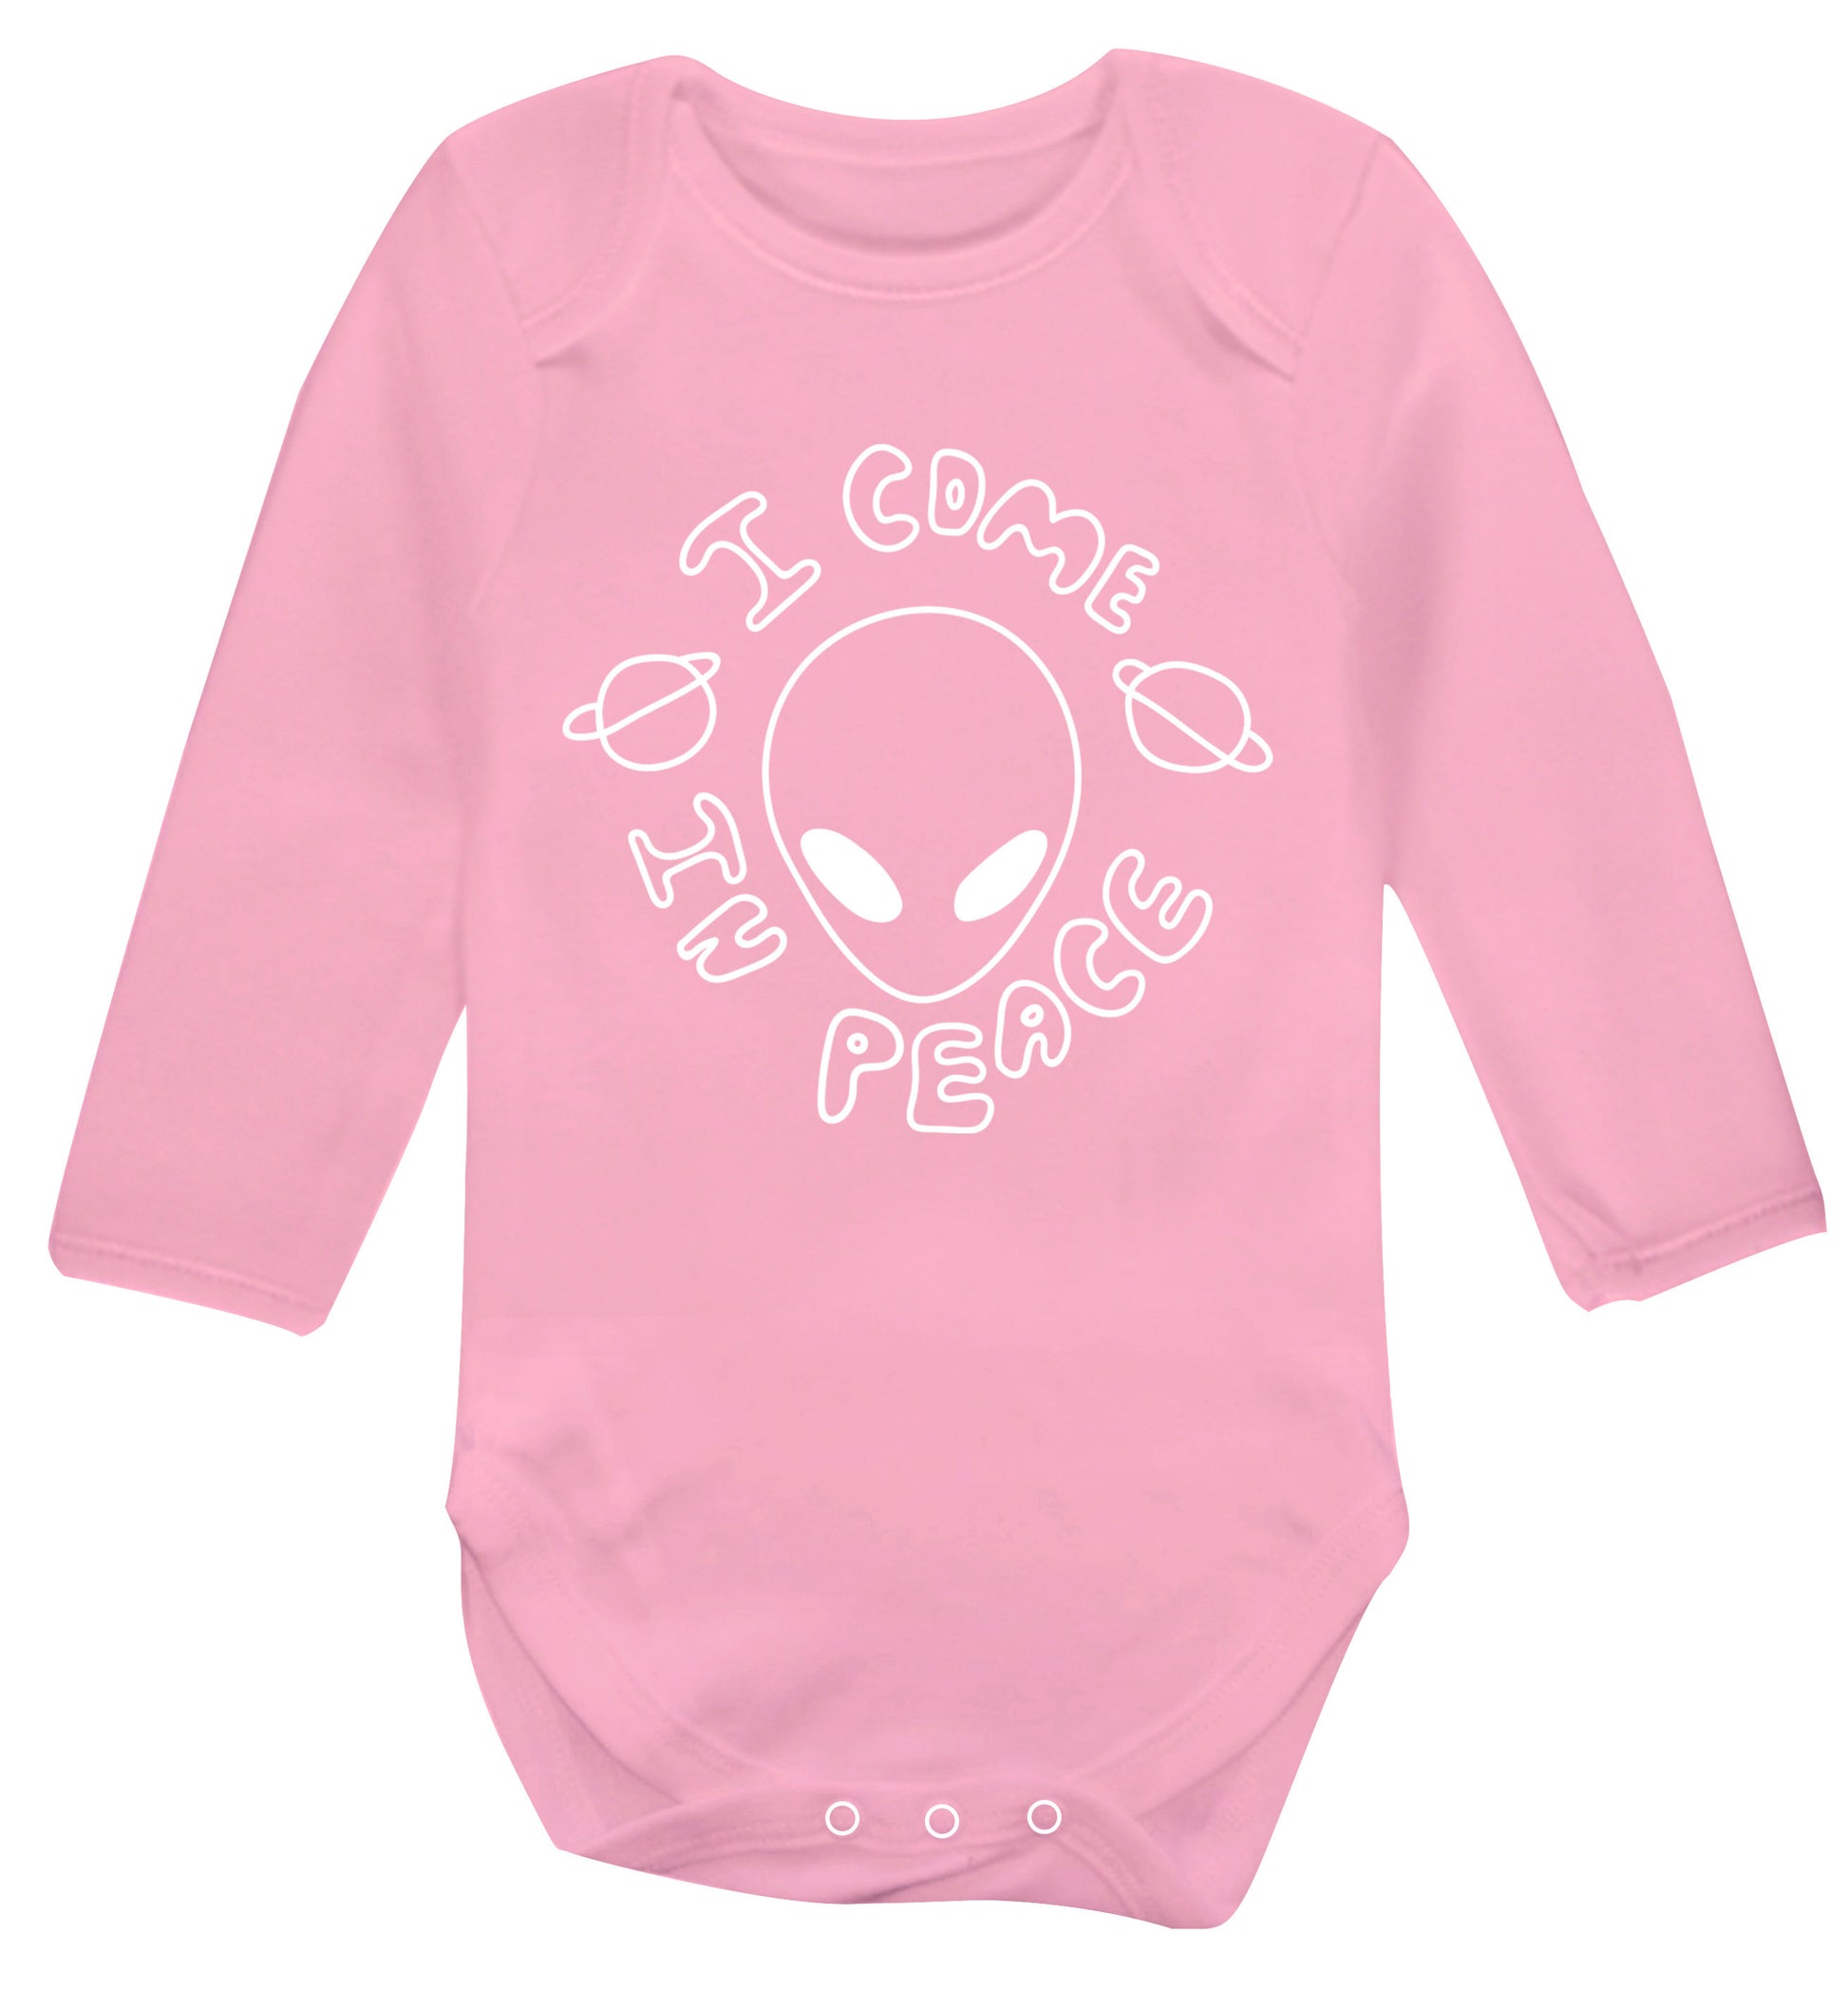 I come in peace Baby Vest long sleeved pale pink 6-12 months